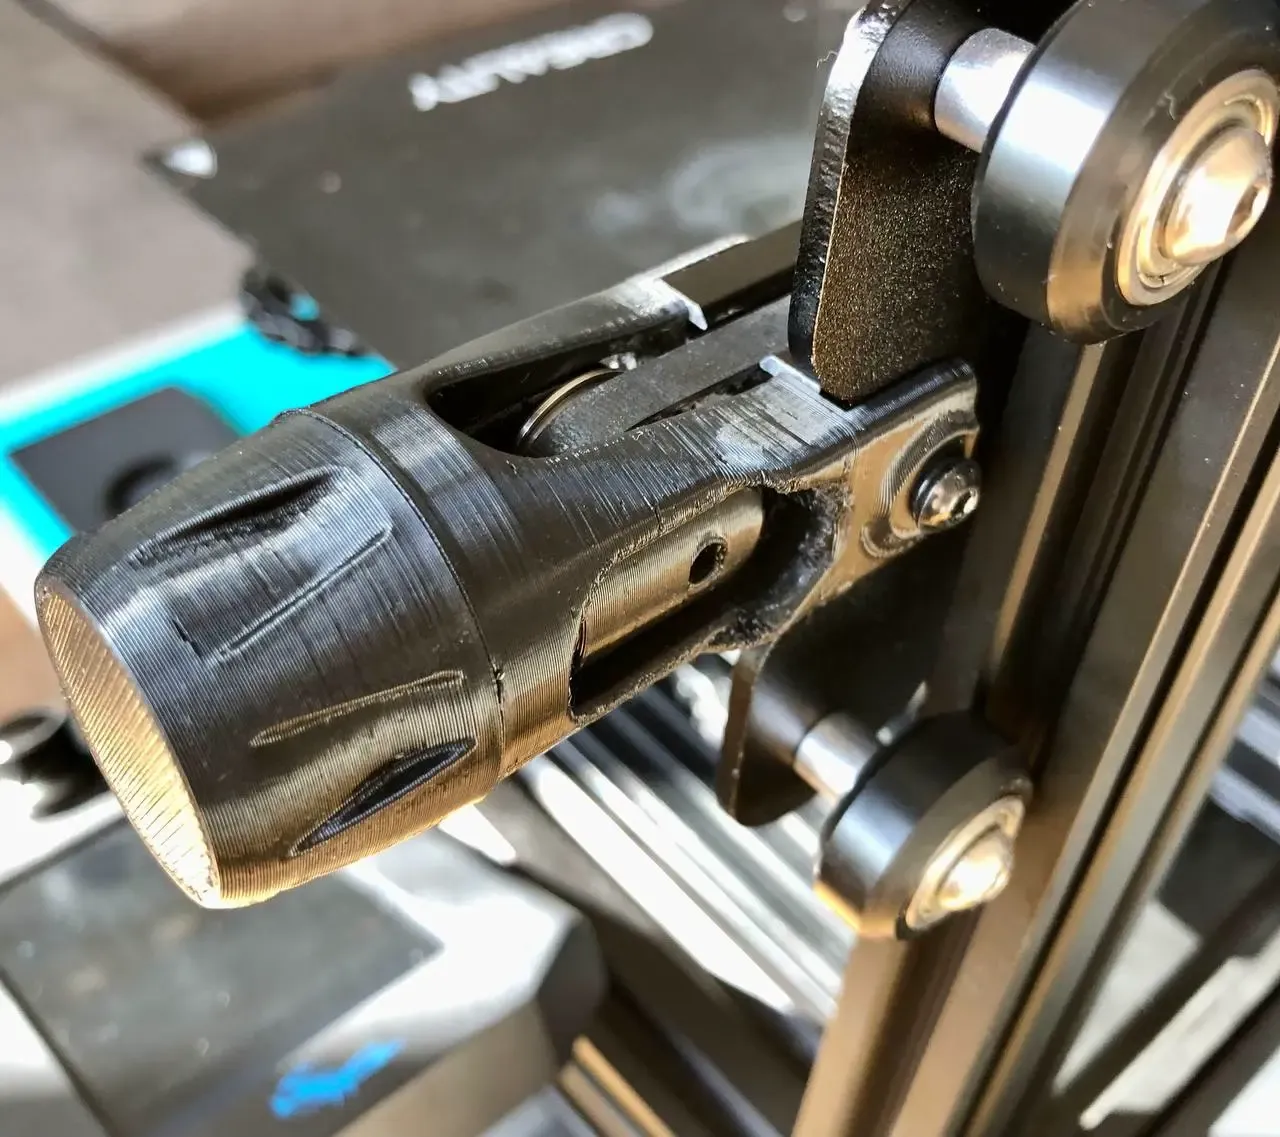 Ender 3 V2 X axis belt tensioner replacement